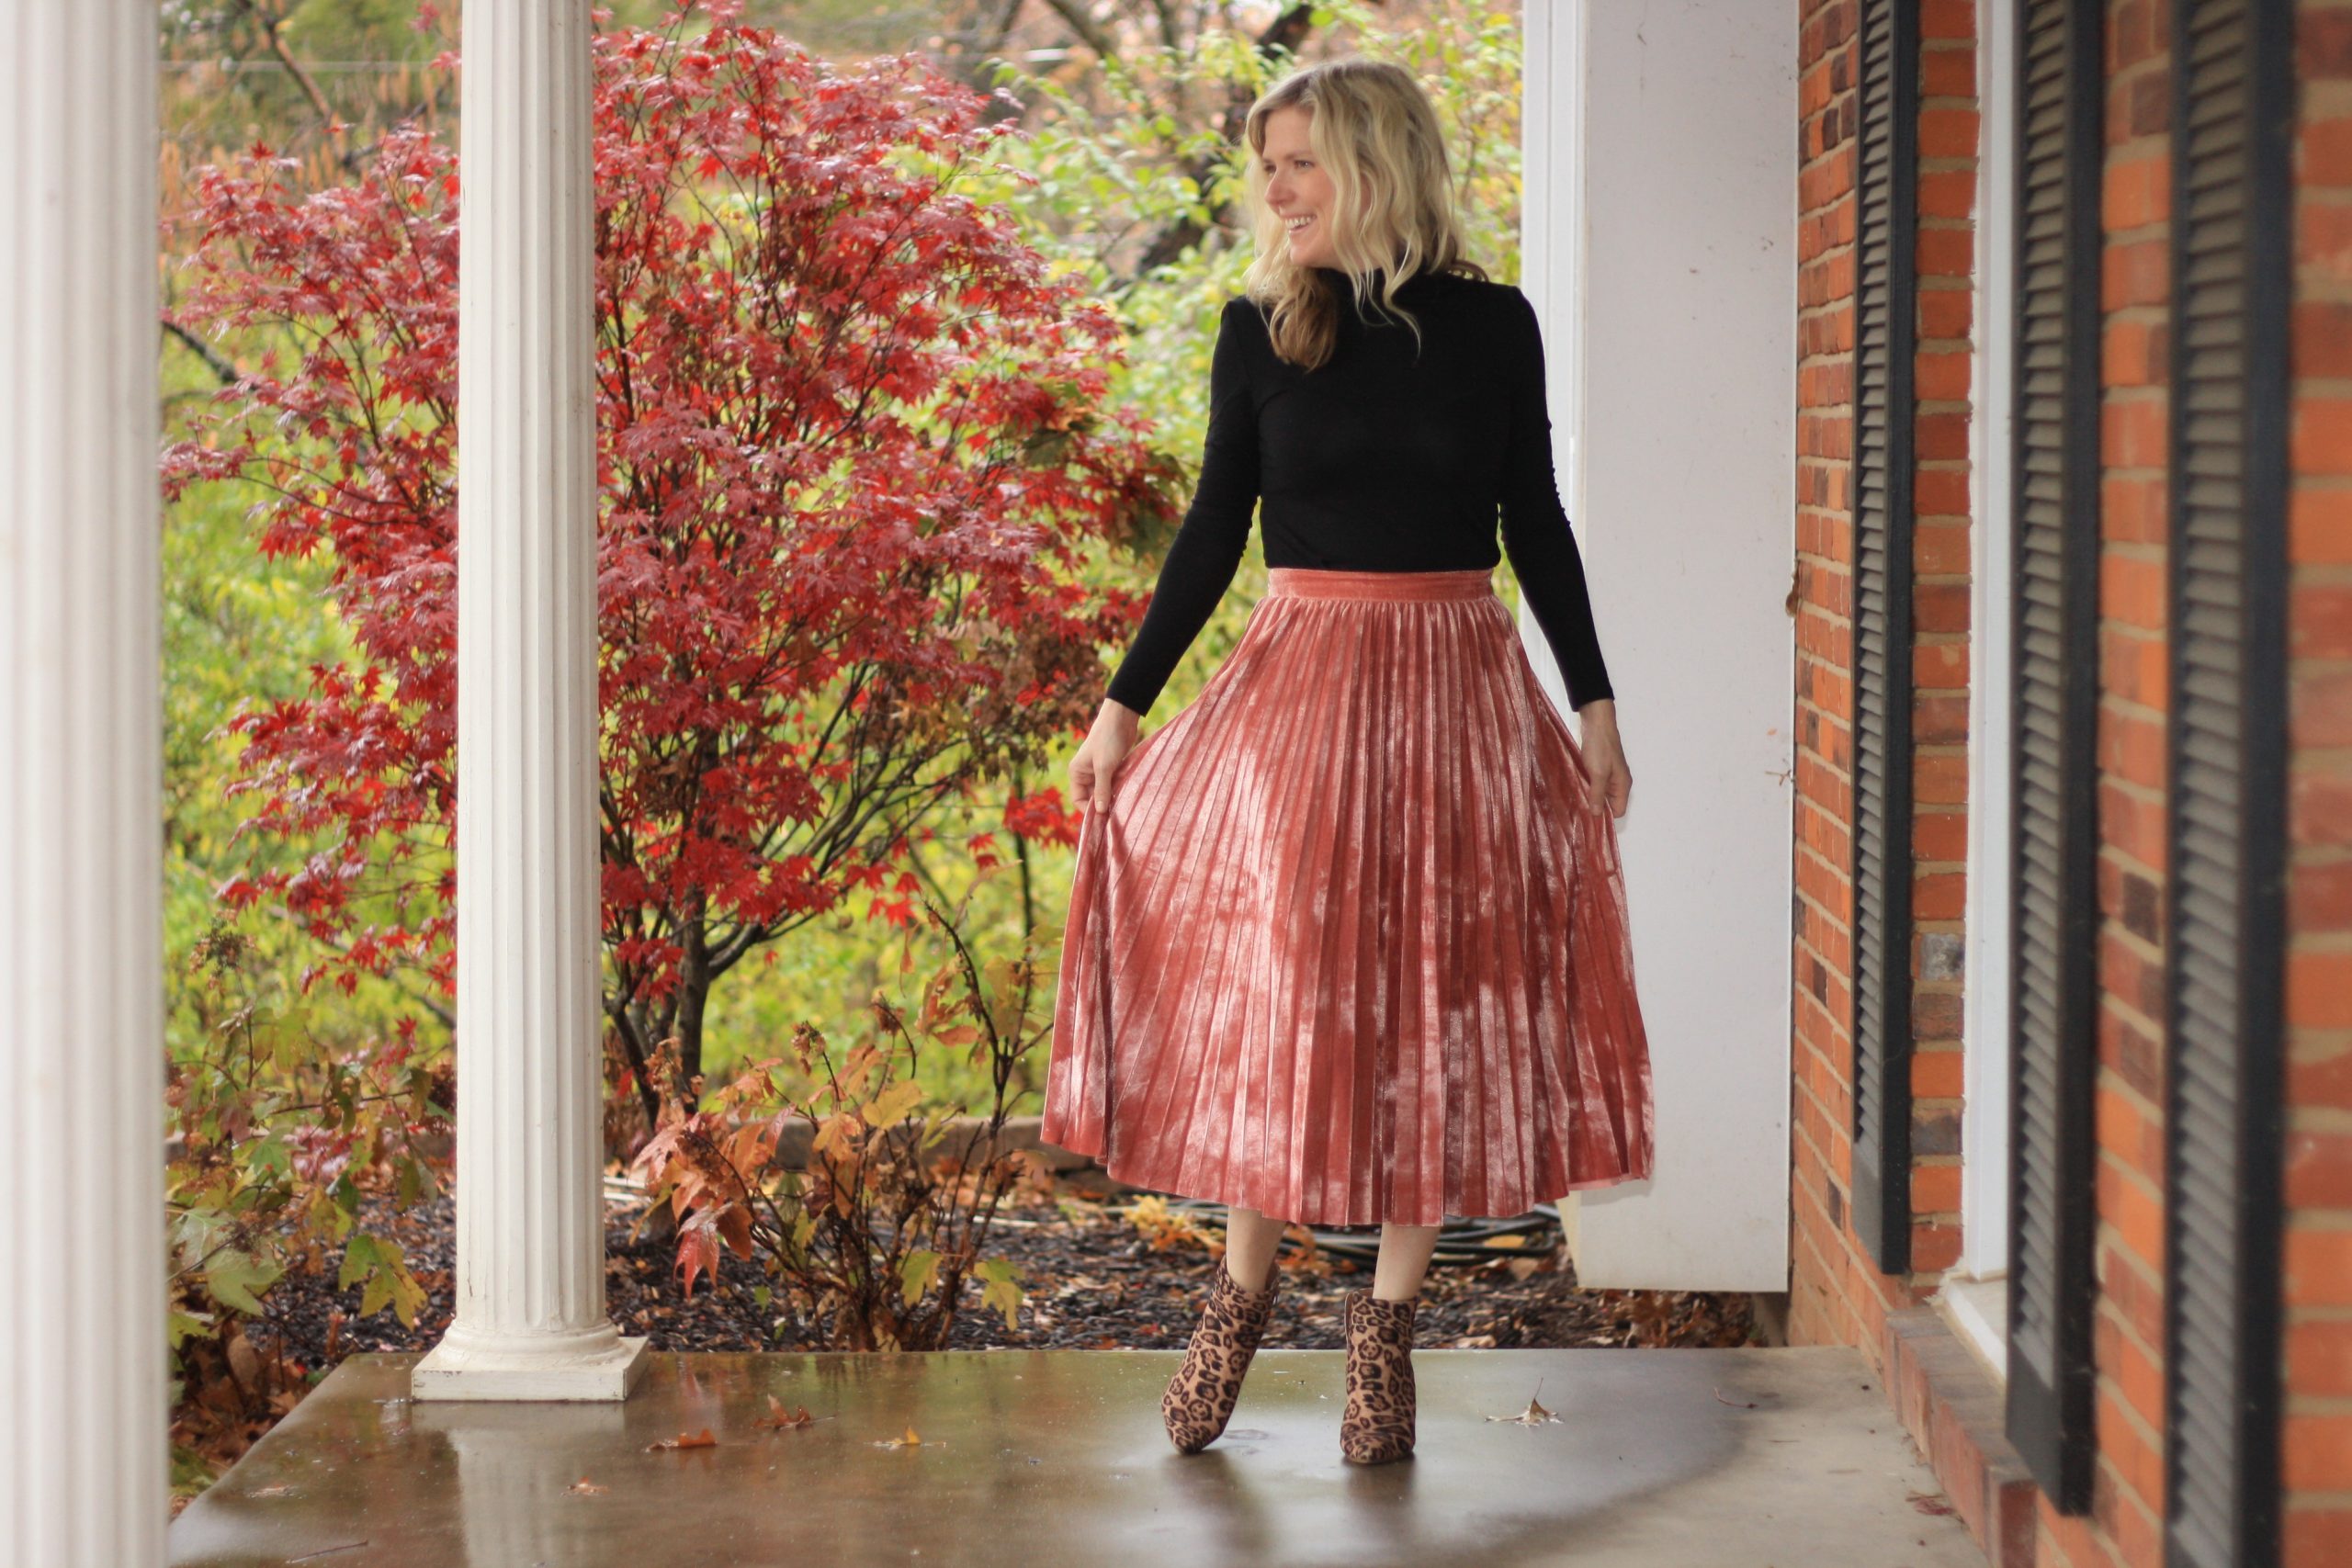 top 3 festive holiday outfits featured by top Missouri fashion blogger, Emmy Lou Styles: image of a blonde woman wearing a red velvet skirt and black turtleneck